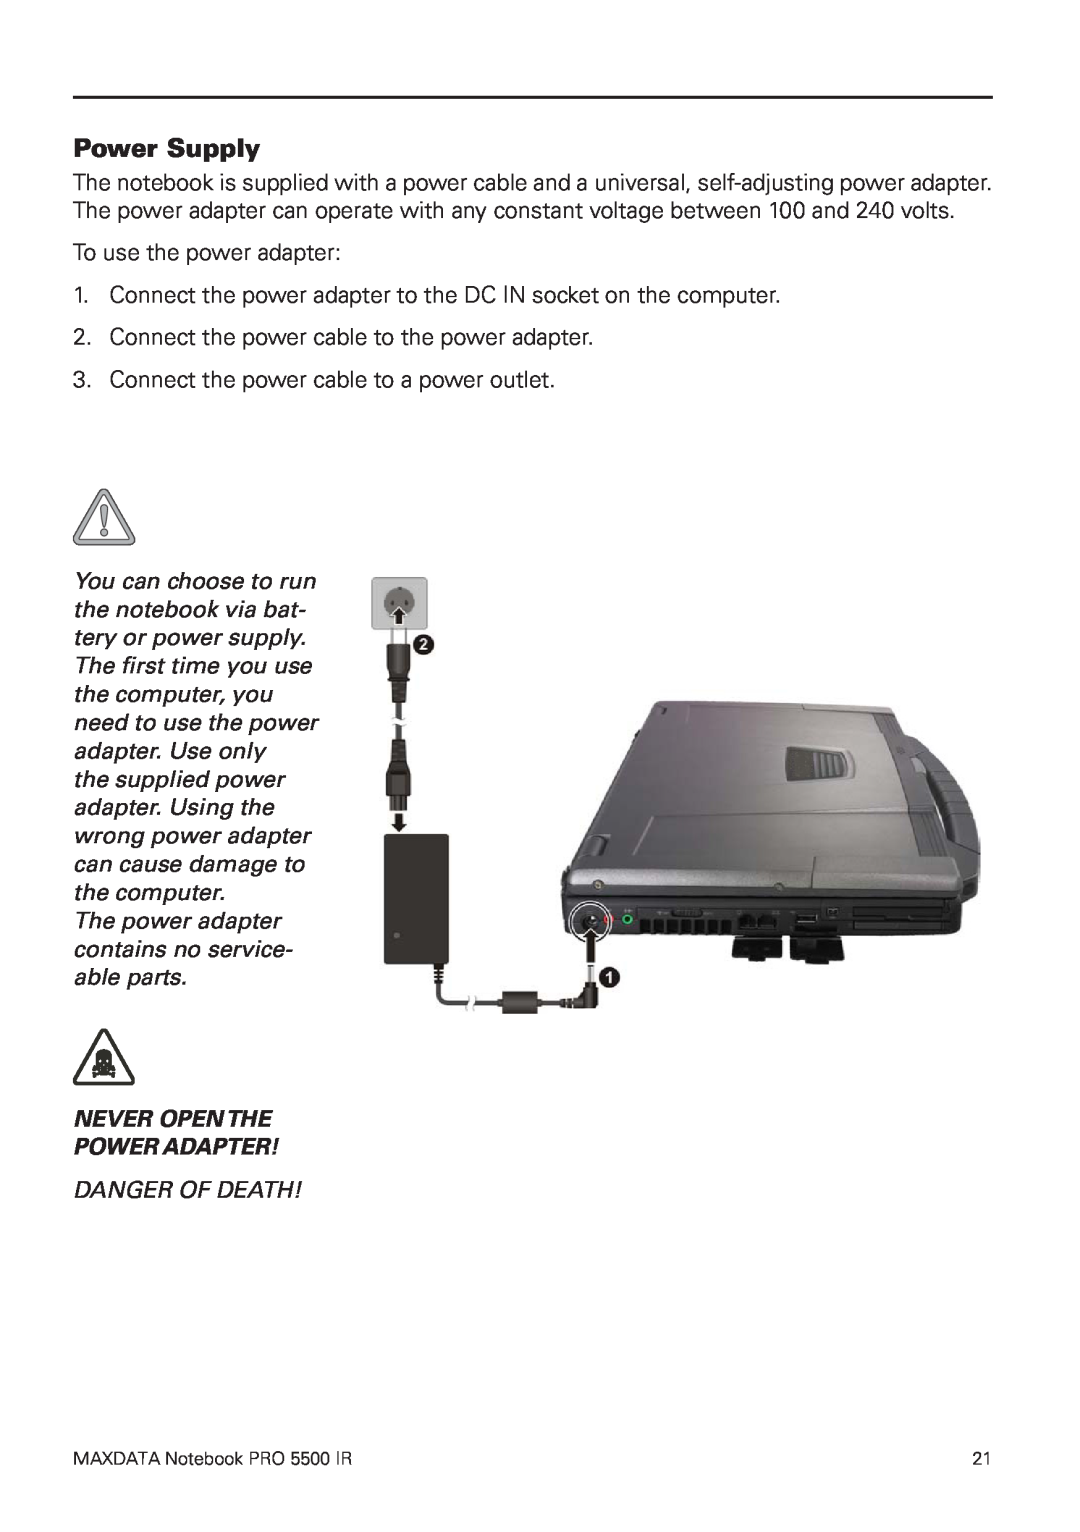 MAXDATA 5500 IR user manual Power Supply, The power adapter contains no service- able parts, Danger Of Death 